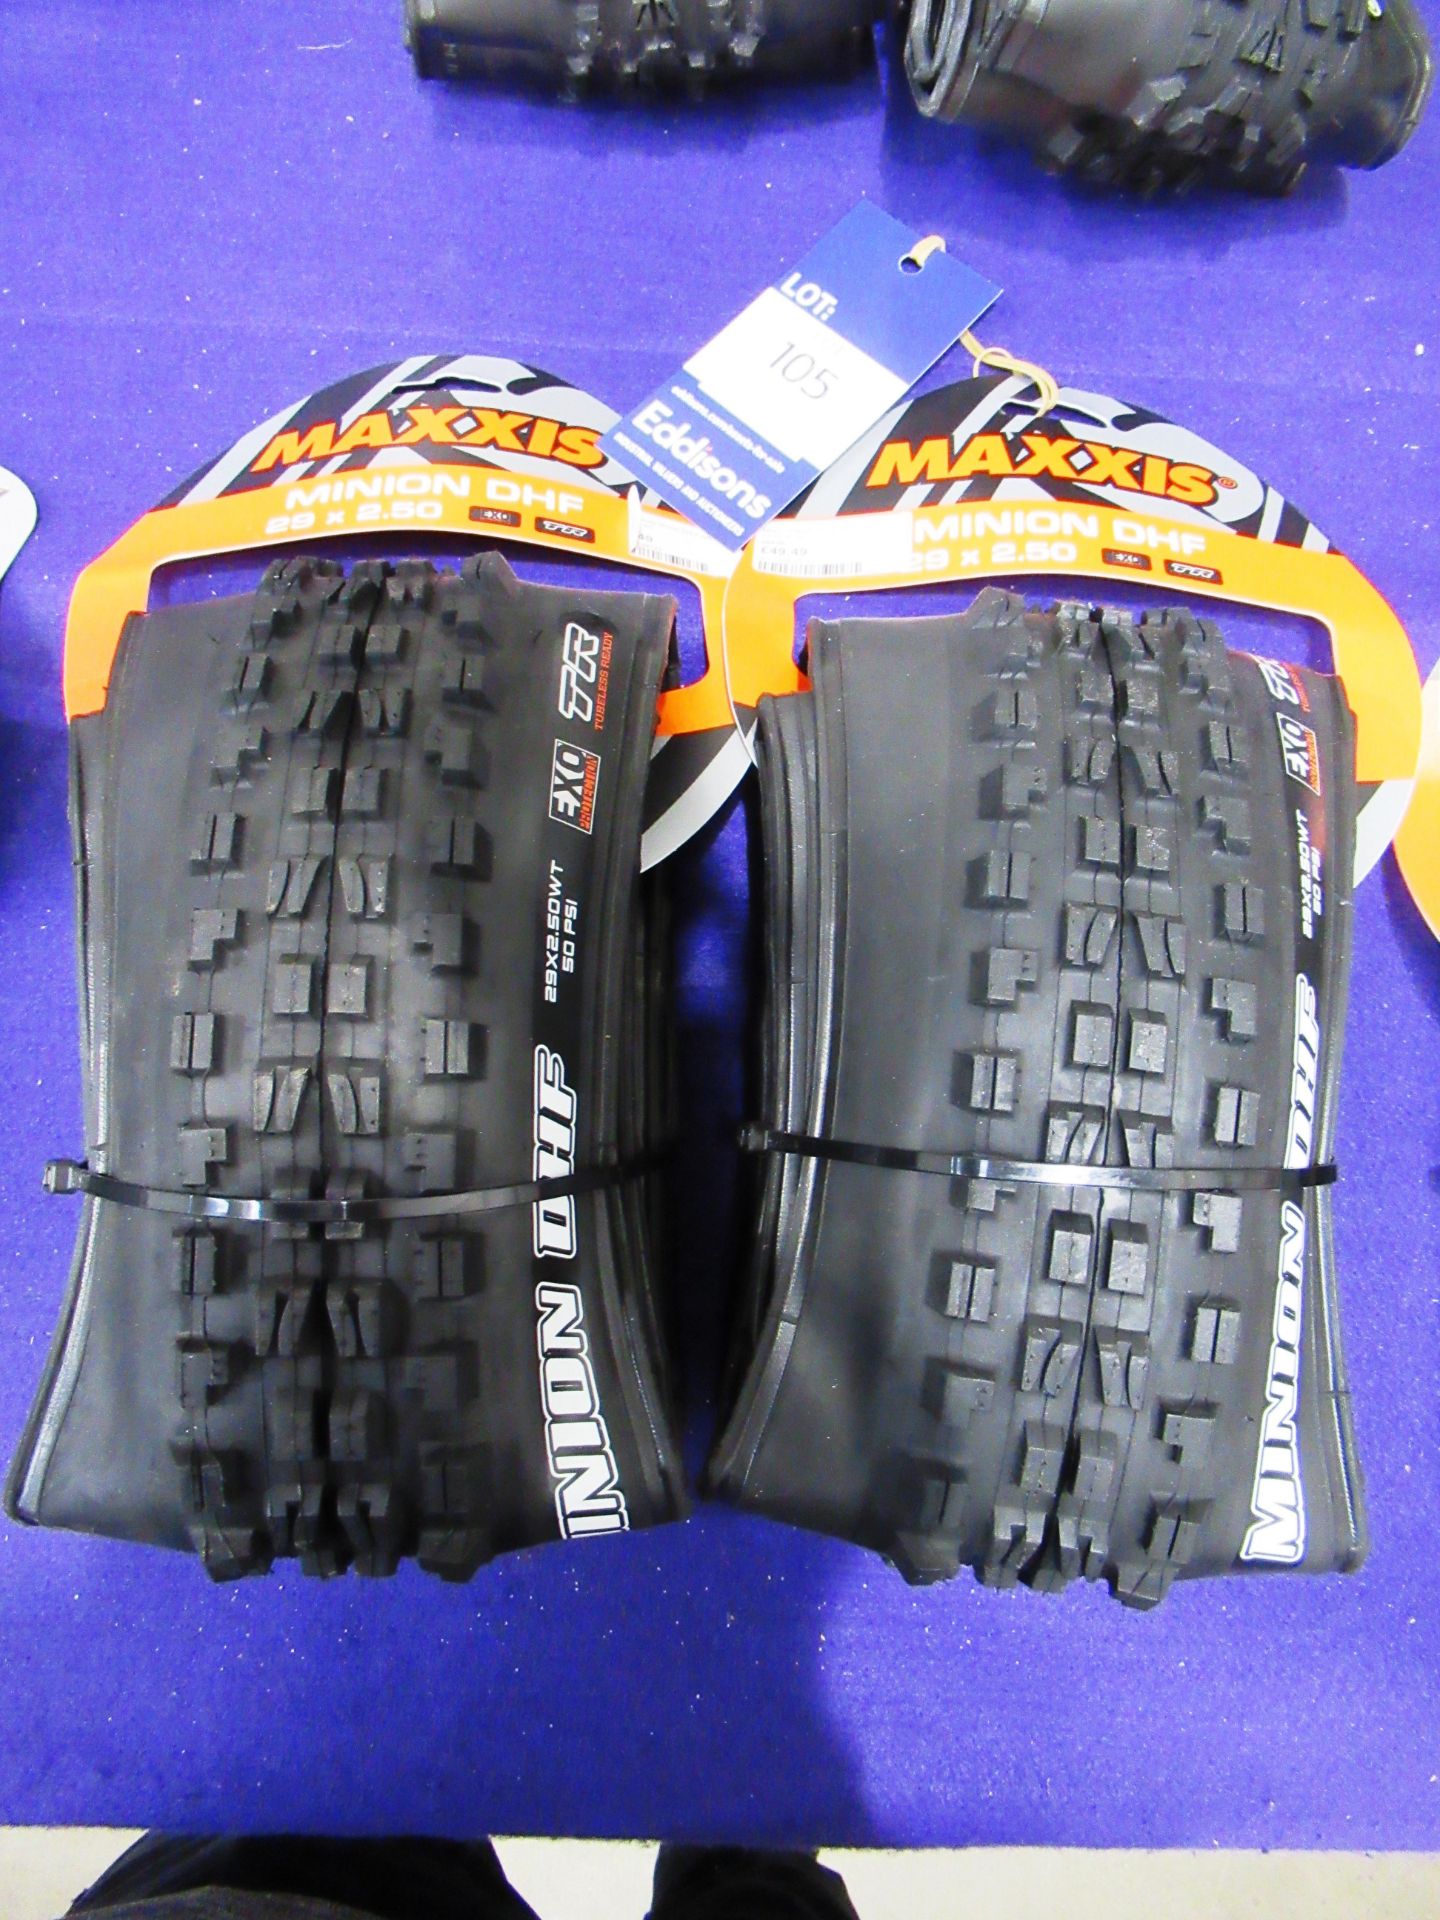 2x Maxxis Minion DHF 29"x2.50 " Bicycle Tyres. Total RRP £99.98